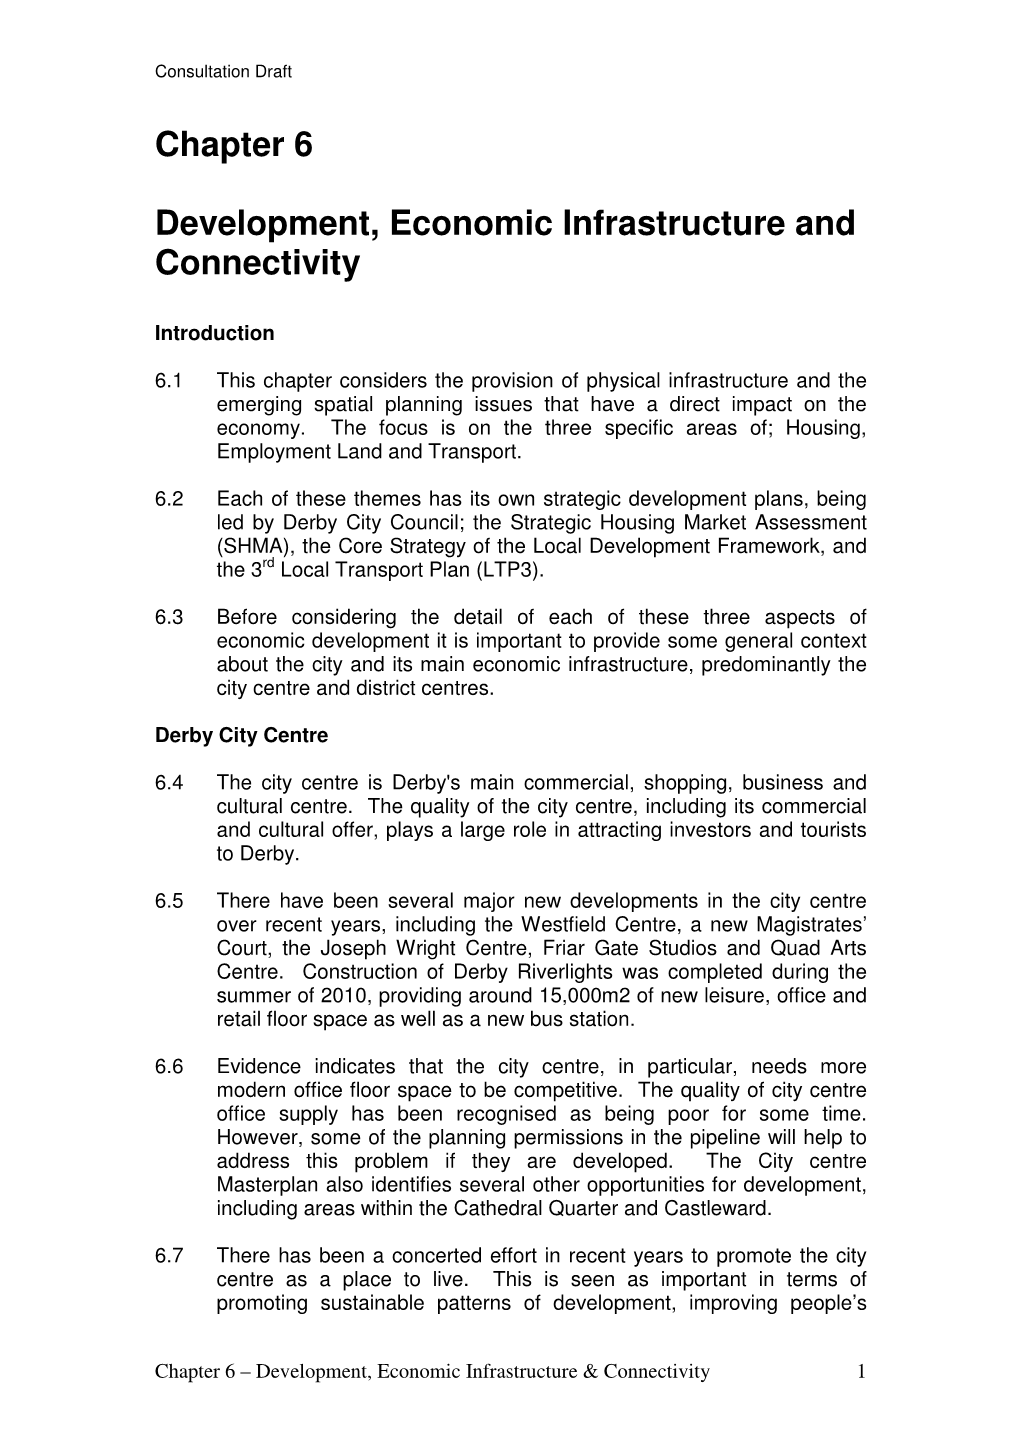 Chapter 6 Development, Economic Infrastructure and Connectivity